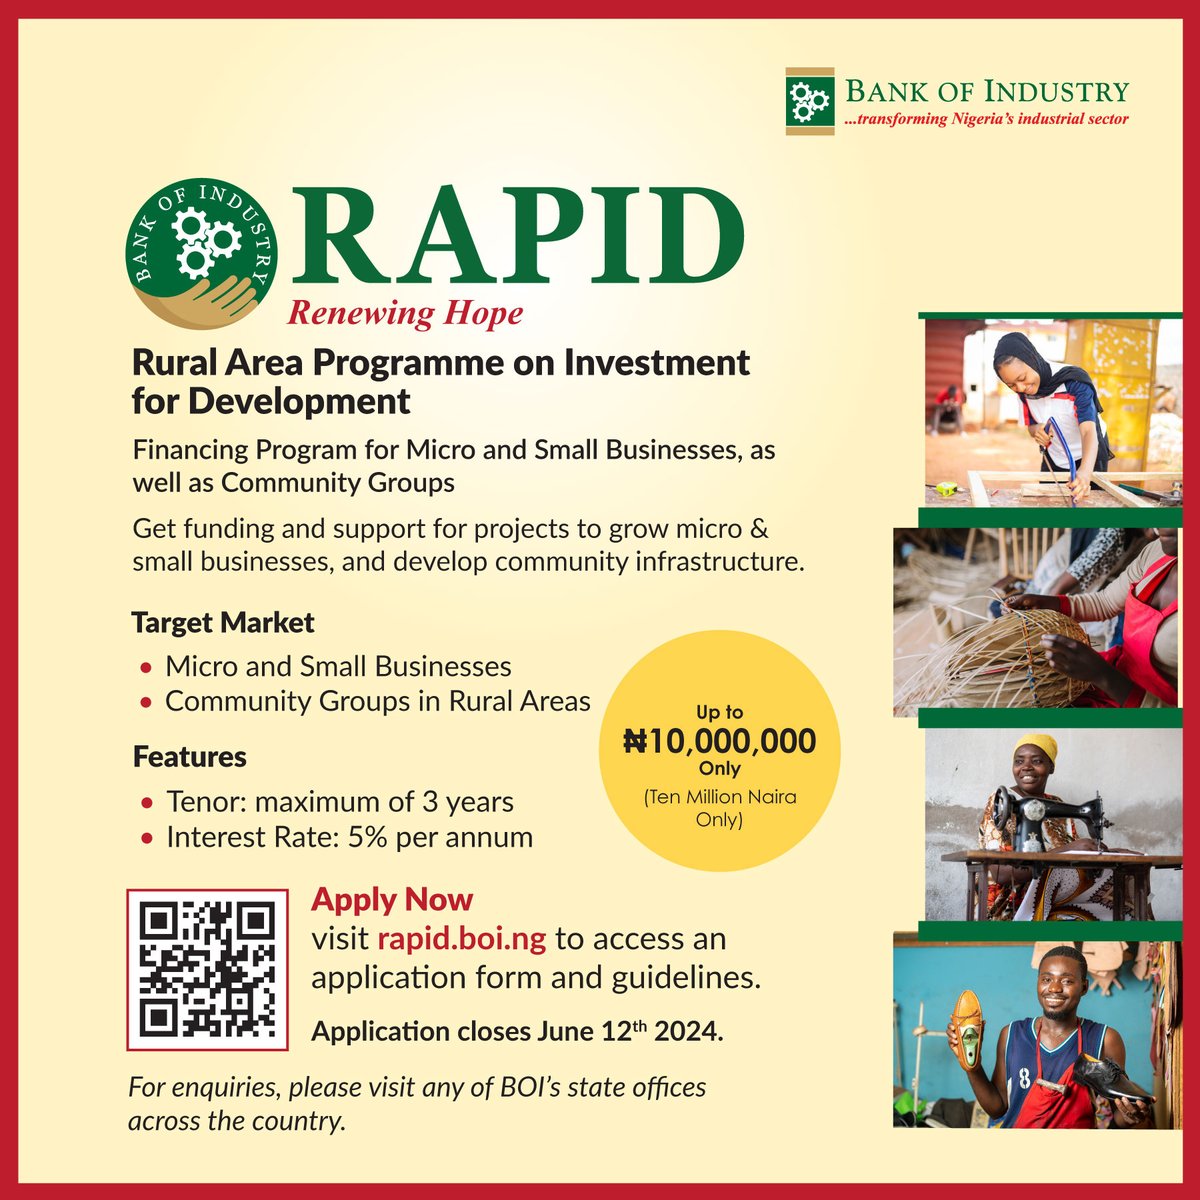 Great news! The application deadline for our RAPID initiative has been extended to June 12, 2024, to ensure every interested entrepreneur has the chance to benefit.

To find out more, please visit rapid.boi.ng .